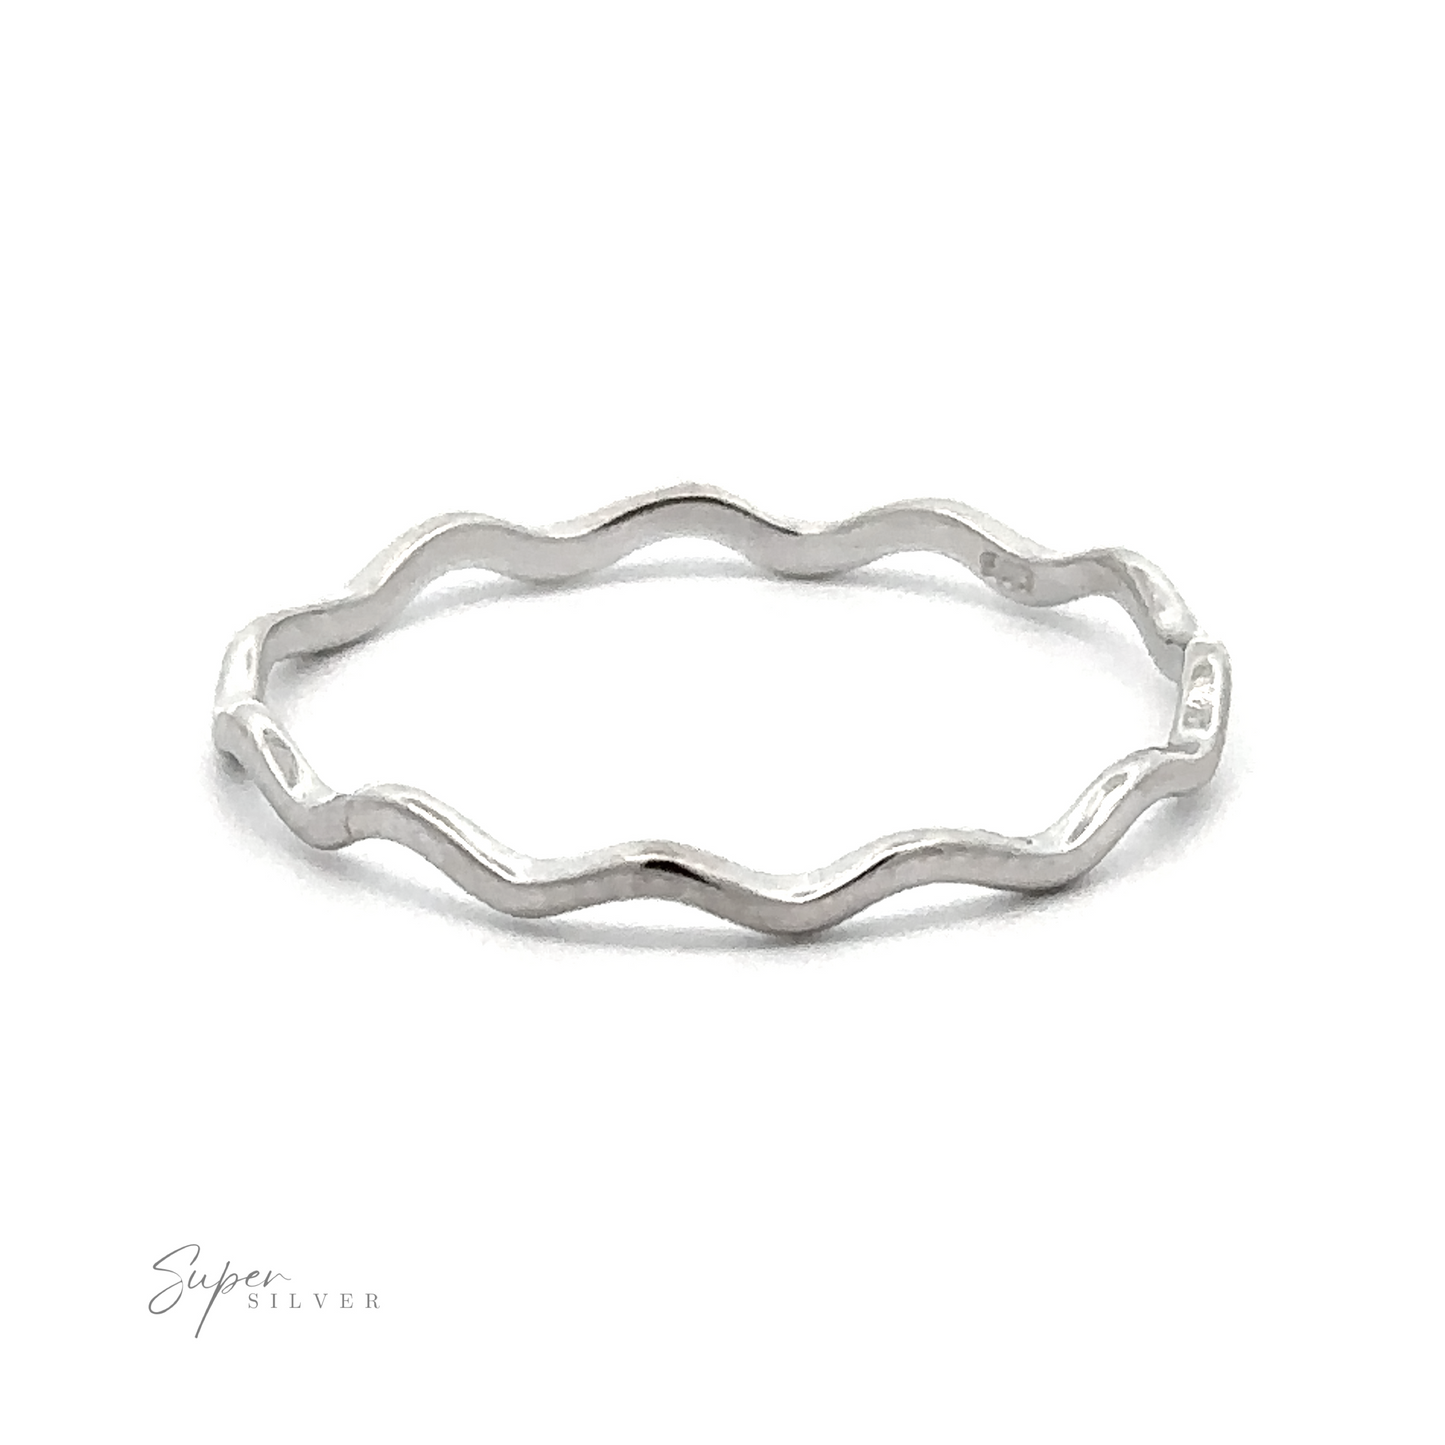 A Sterling Silver Wavy Band with a wavy pattern design.